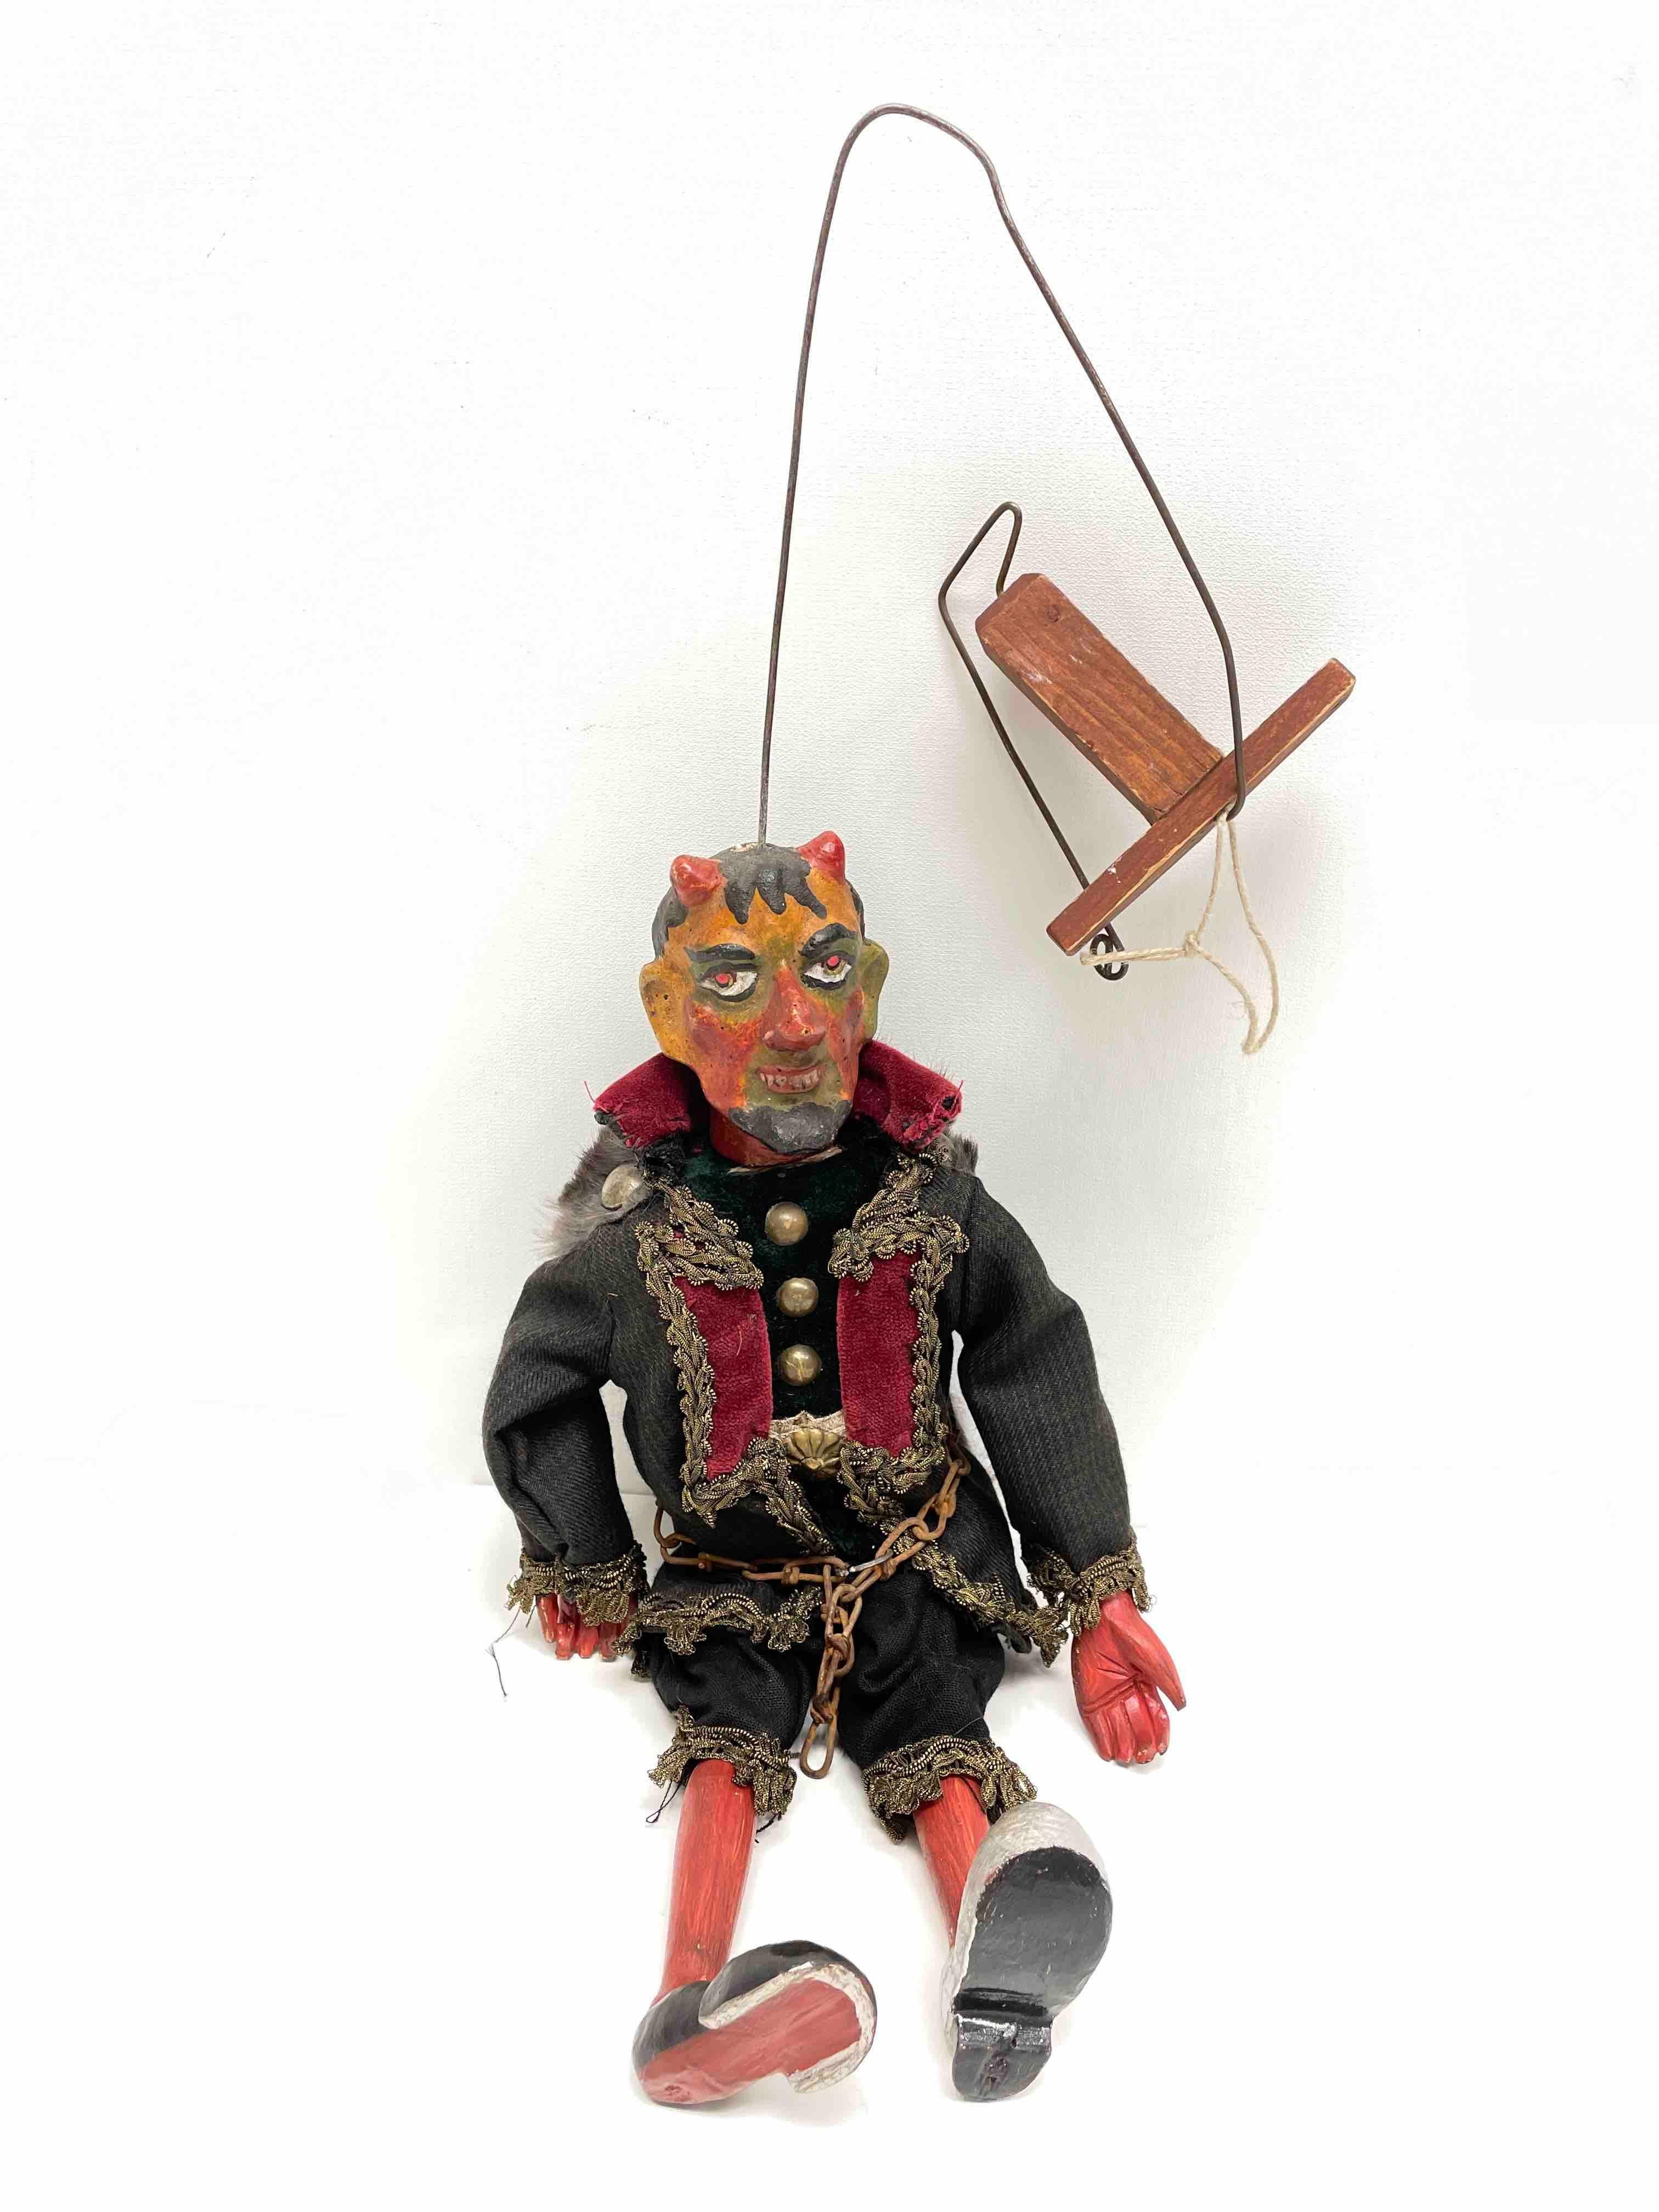 This is a wonderful depiction of Krampus or the devil puppet. The item is approximately 14.5 inches tall and has a skeleton, arms and legs made of wood. Height was measured from foot to the end of the horns. The head is made of wood and composition,